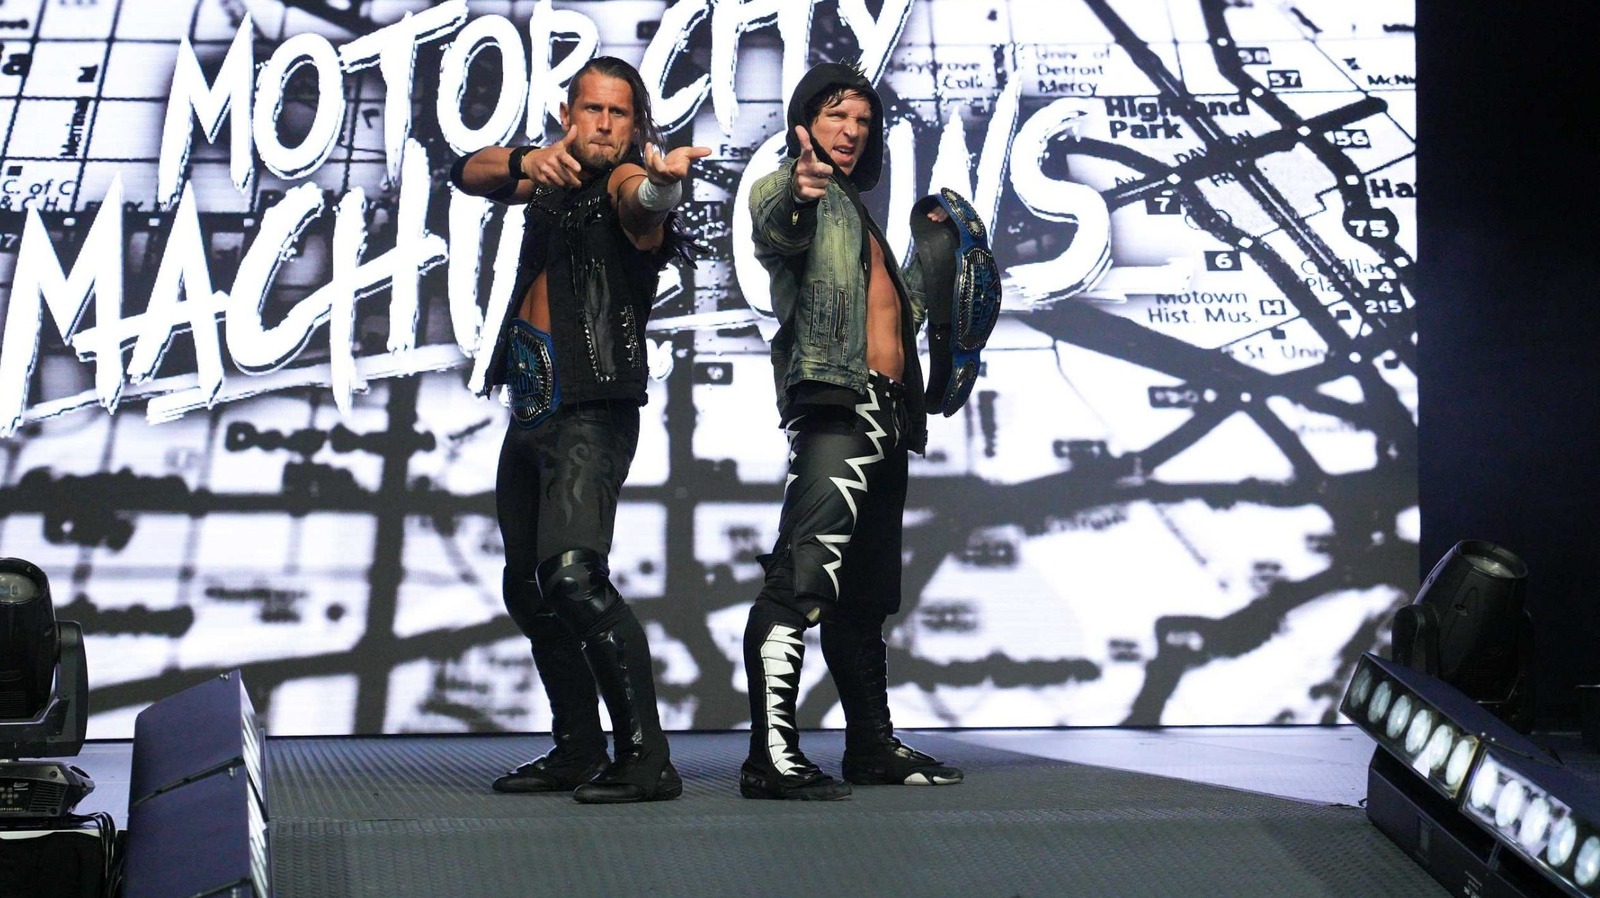 Alex Shelley & Chris Sabin, The Motor City Machine Guns, Reportedly Finished With TNA